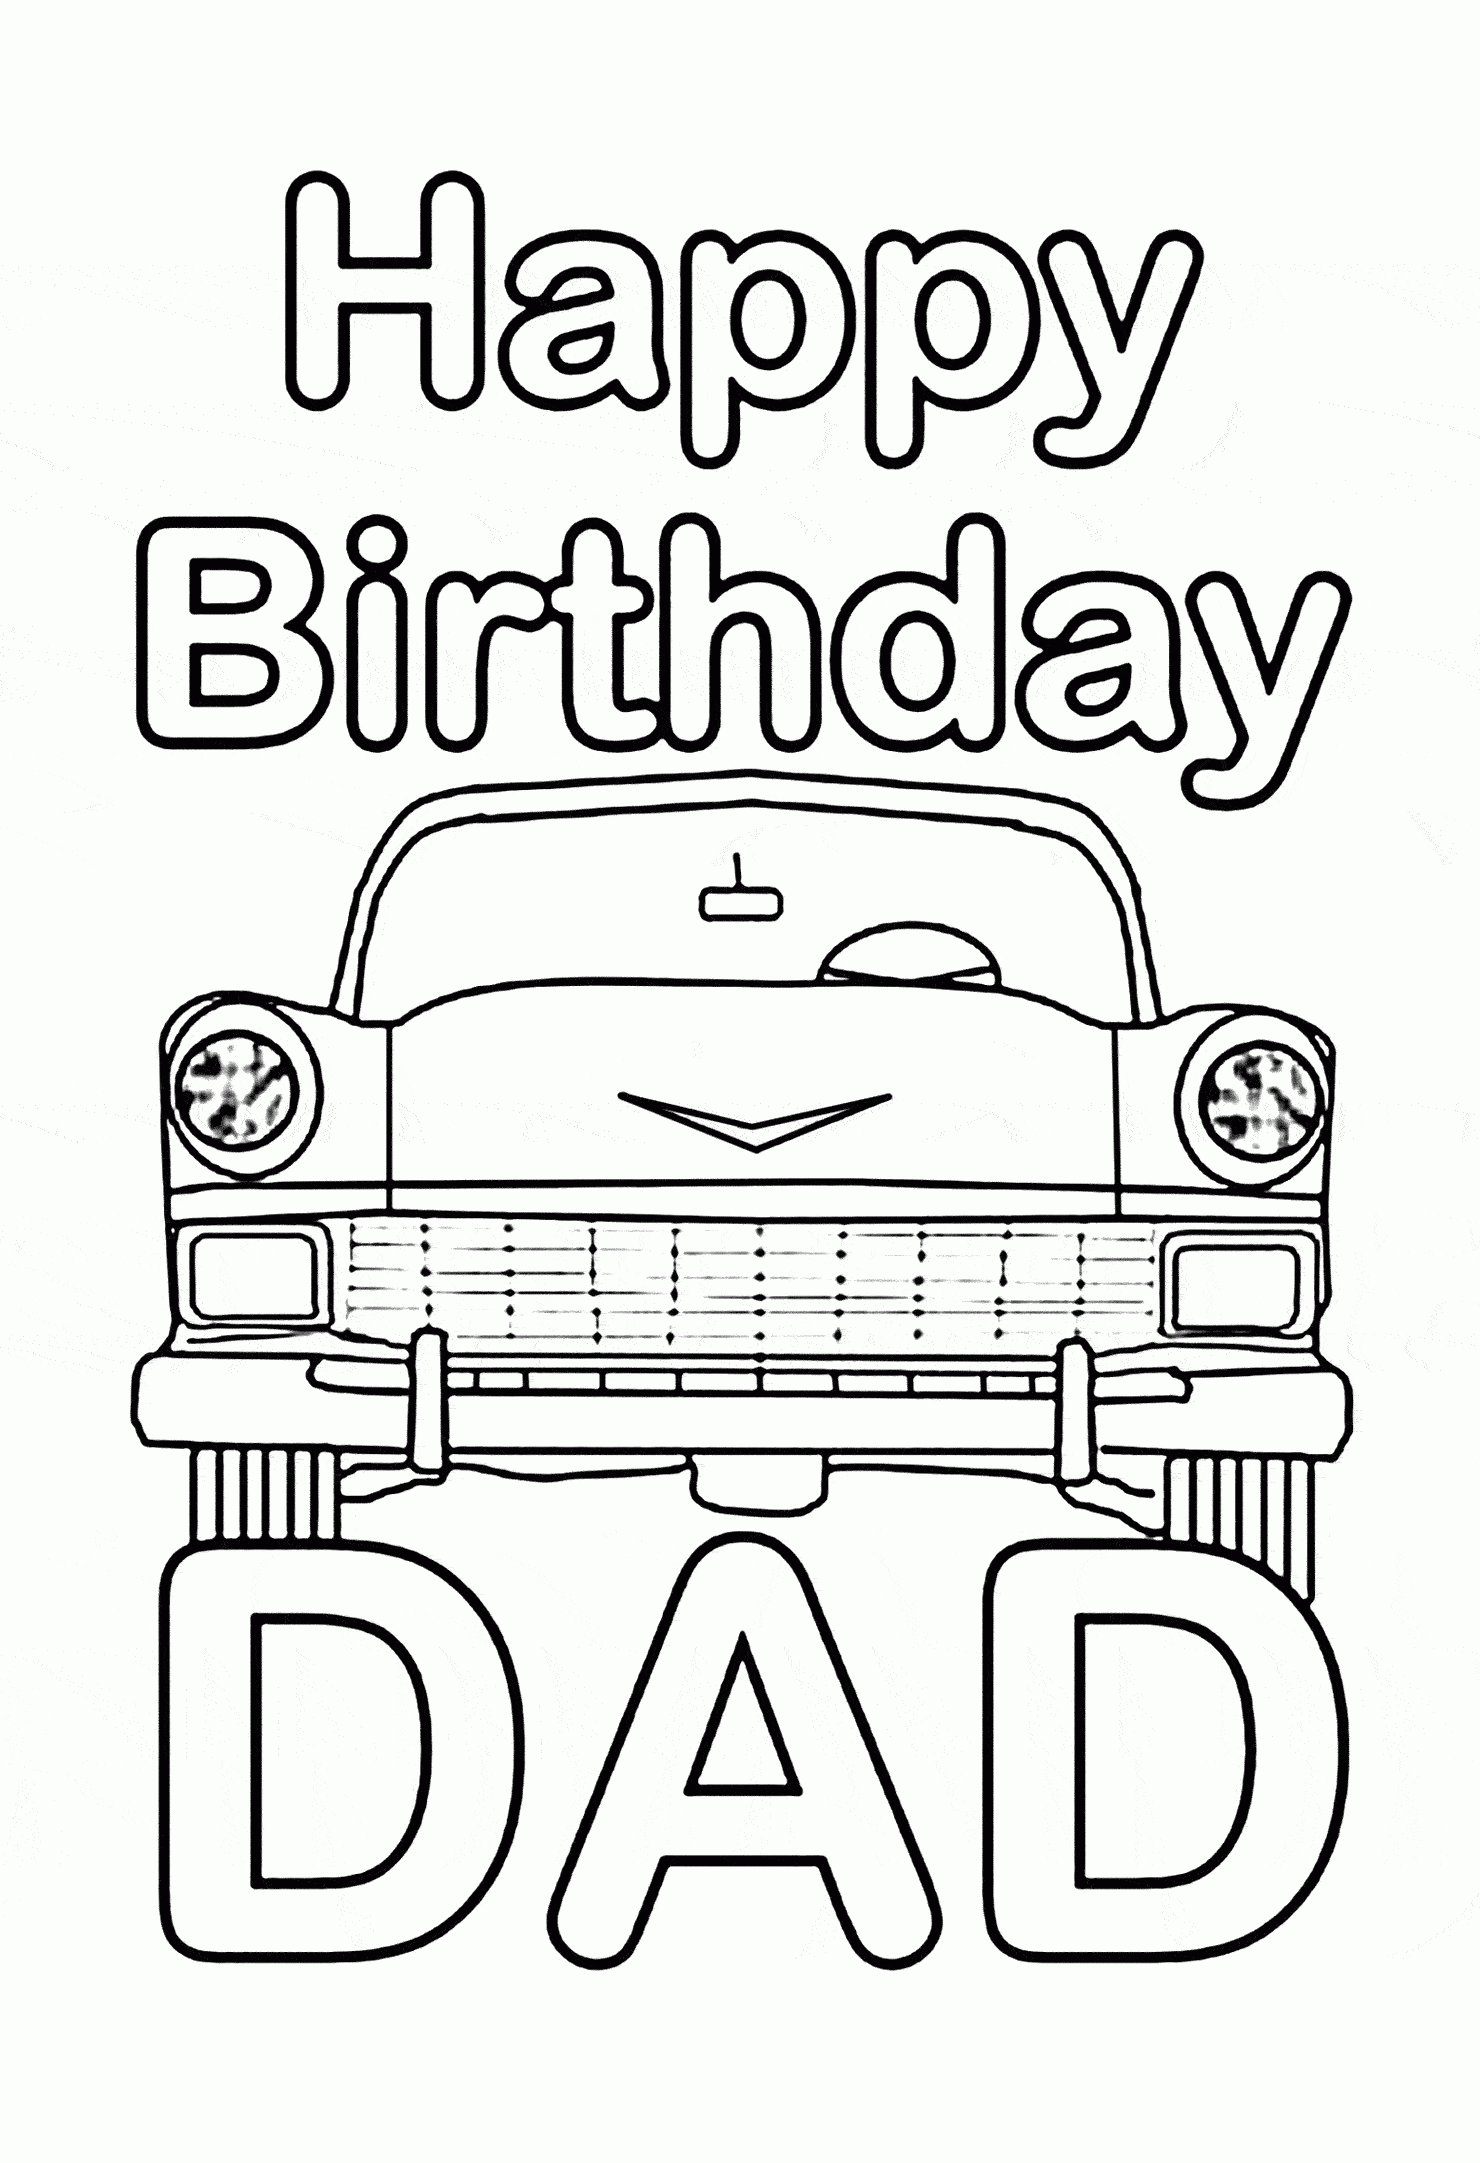 Happy Birthday Daddy Printable Coloring Page.